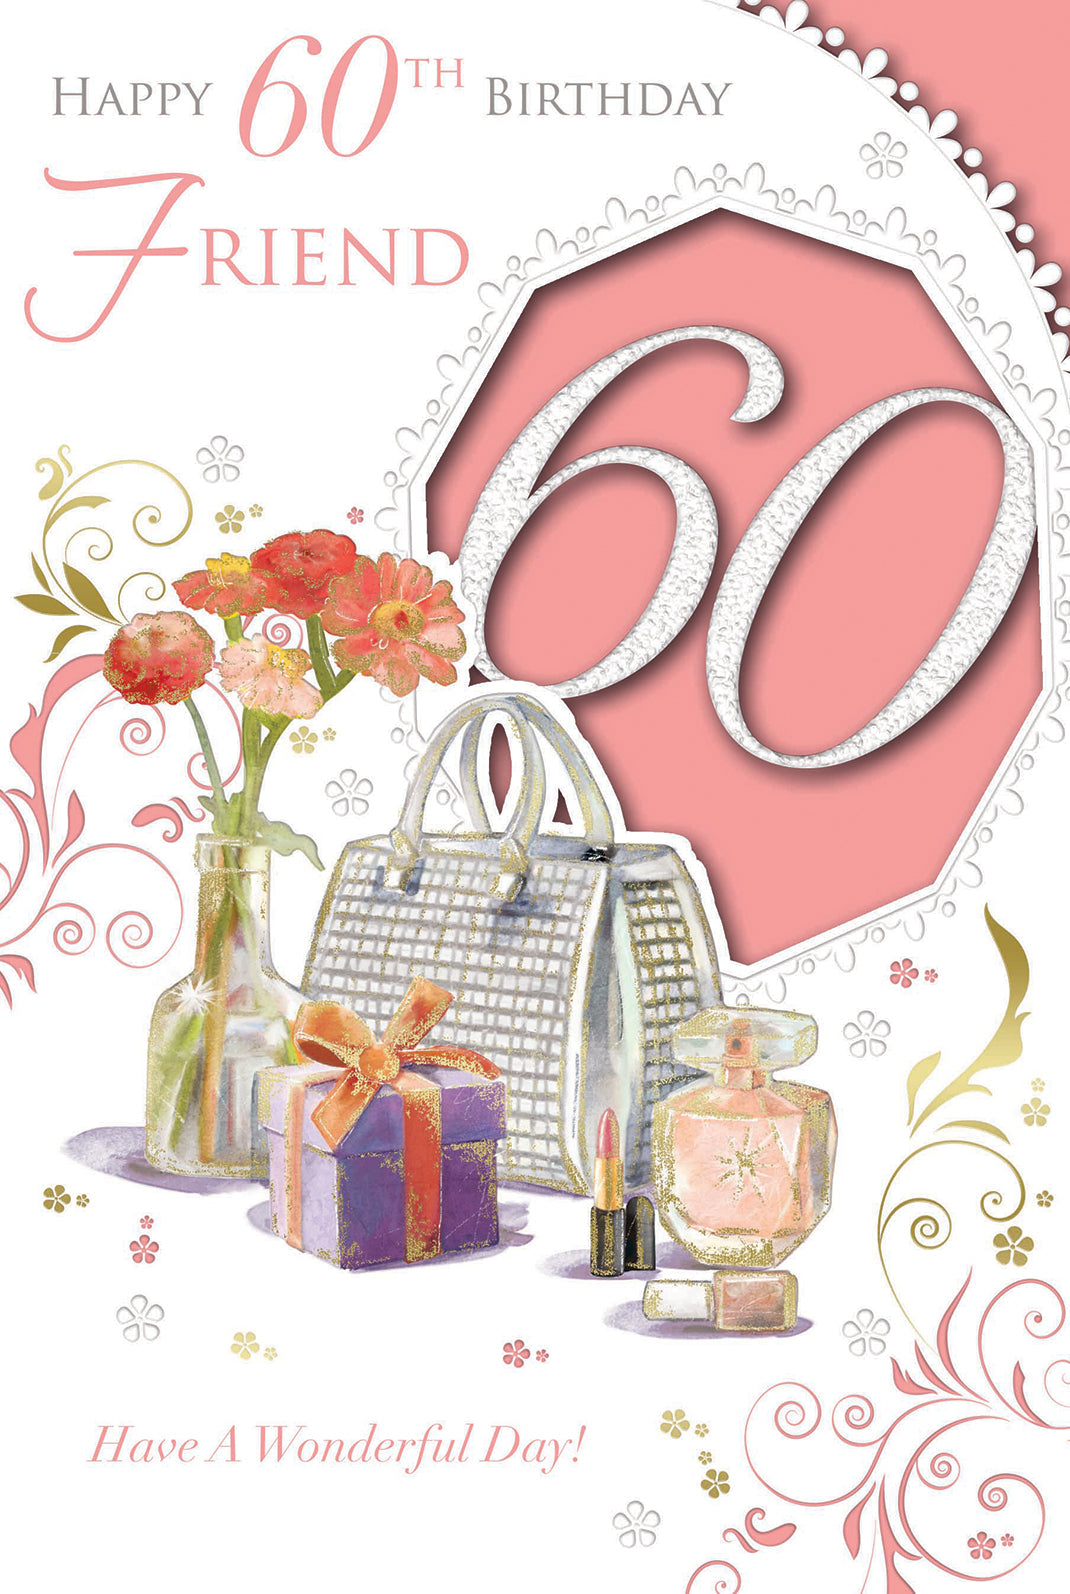 What To Say On 60th Wedding Anniversary Card